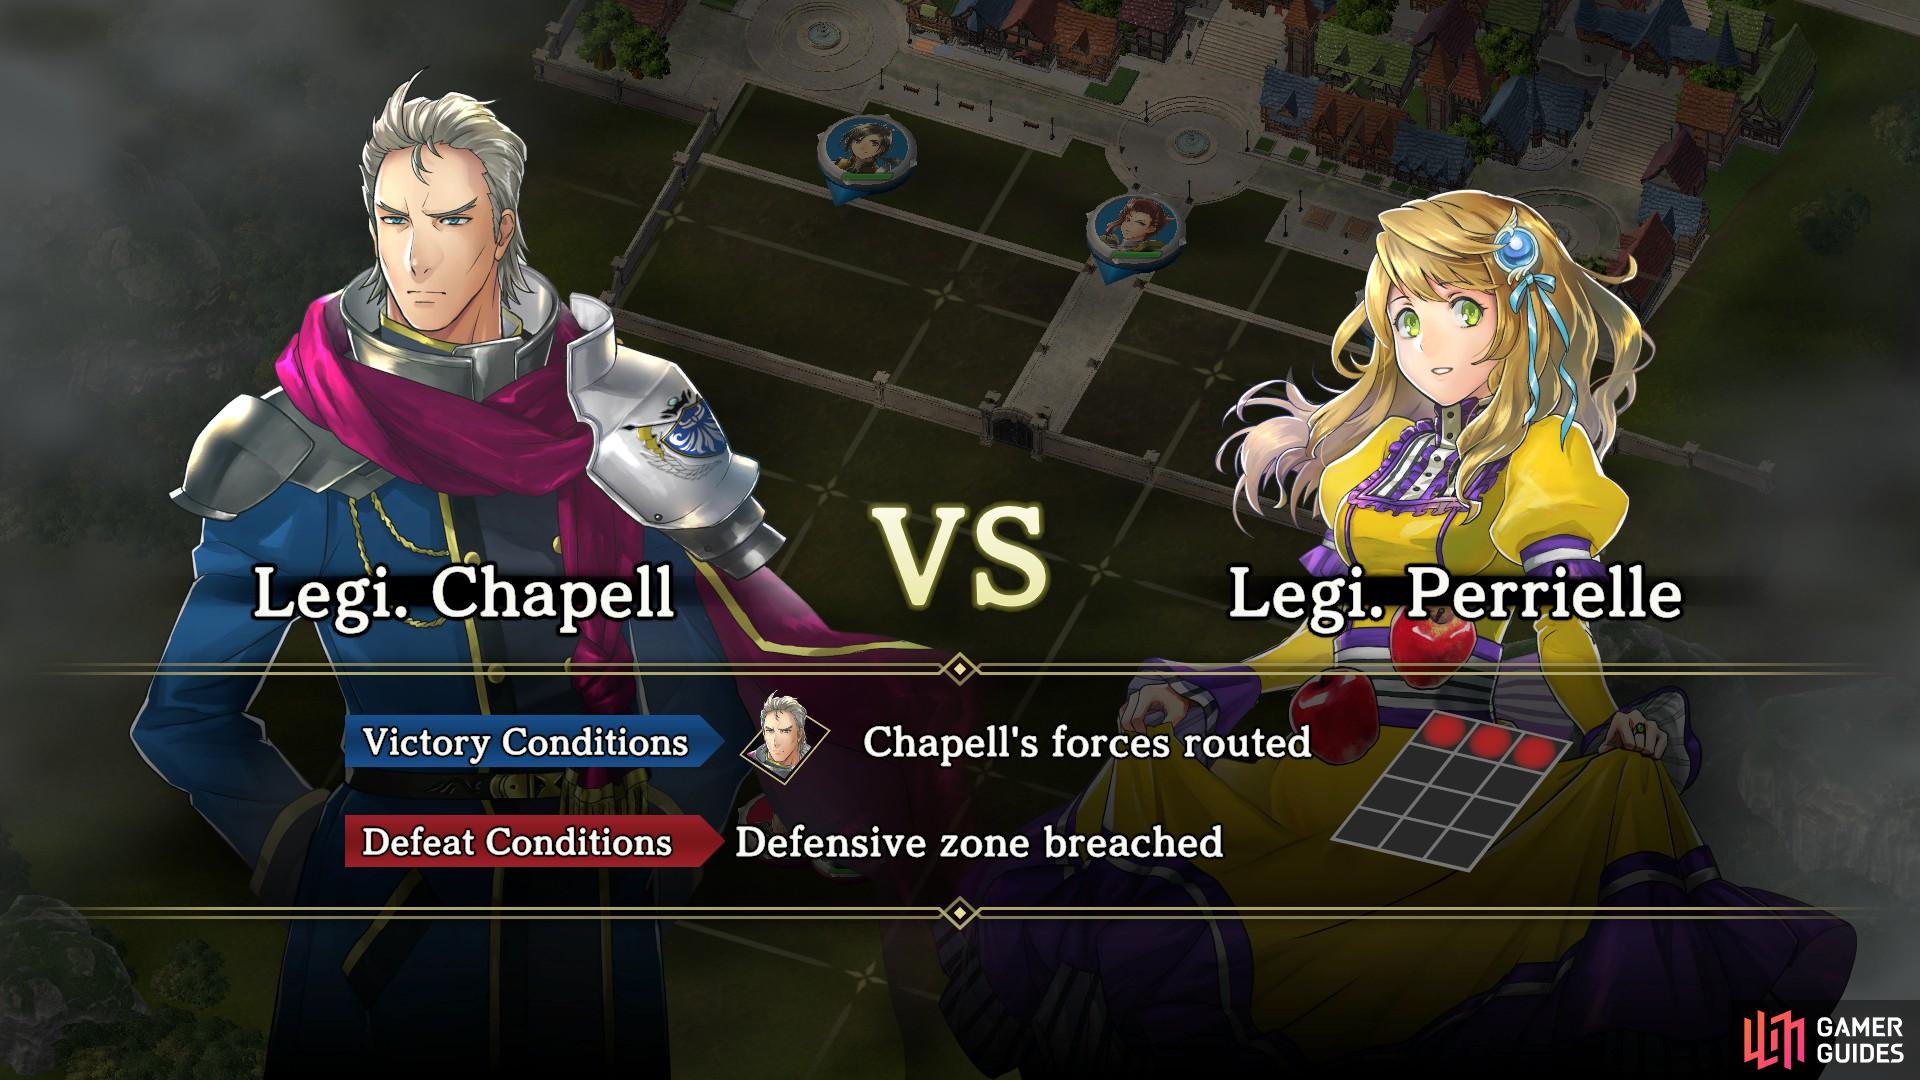 Chapell Vs Perrielle is the first War battle in the game.